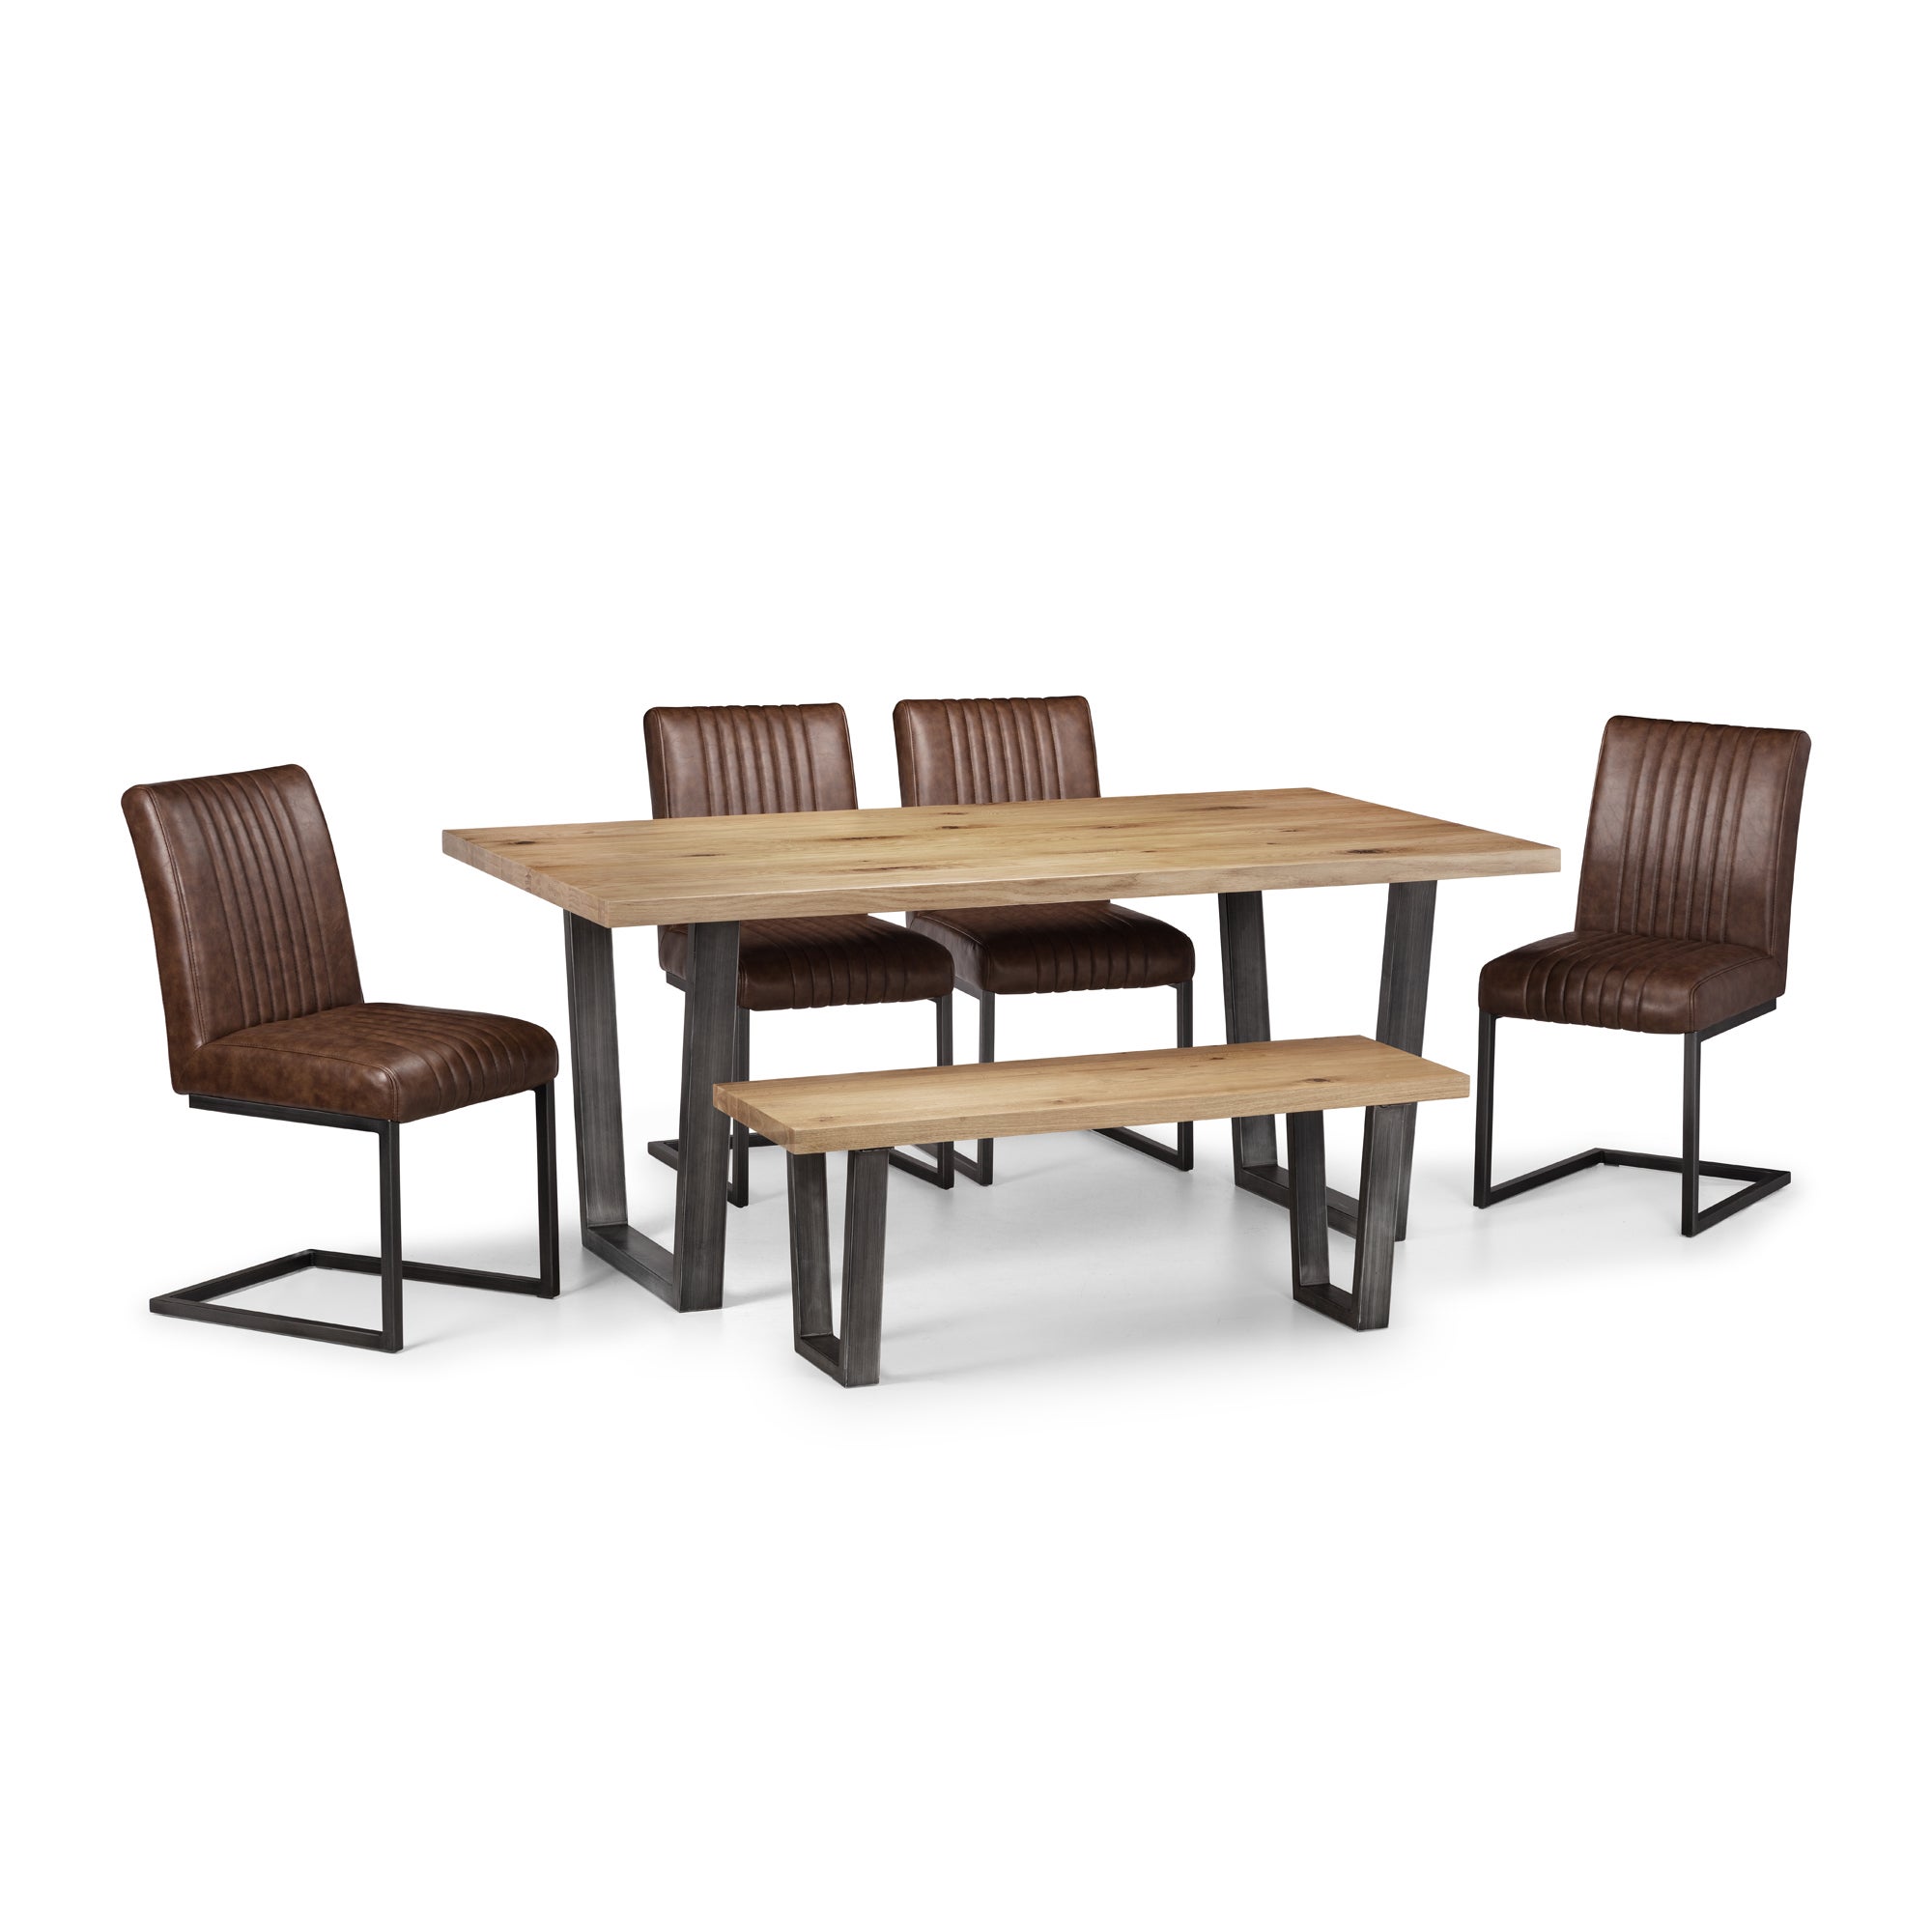 Brooklyn Rectangular Dining Table with 4 Chairs and Bench, Solid Oak Brown